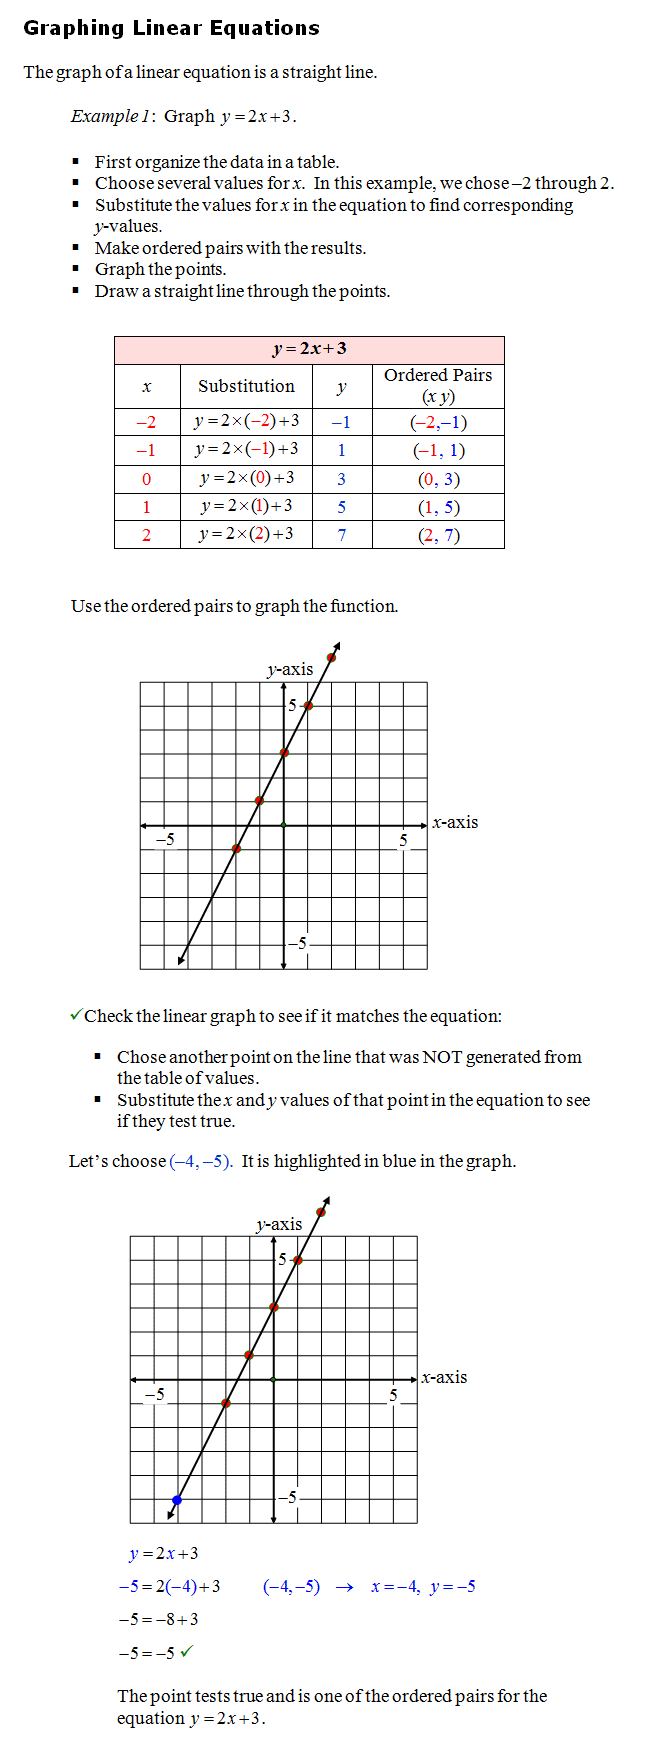 Linear Functions With Graphing Linear Equations Worksheet Answers